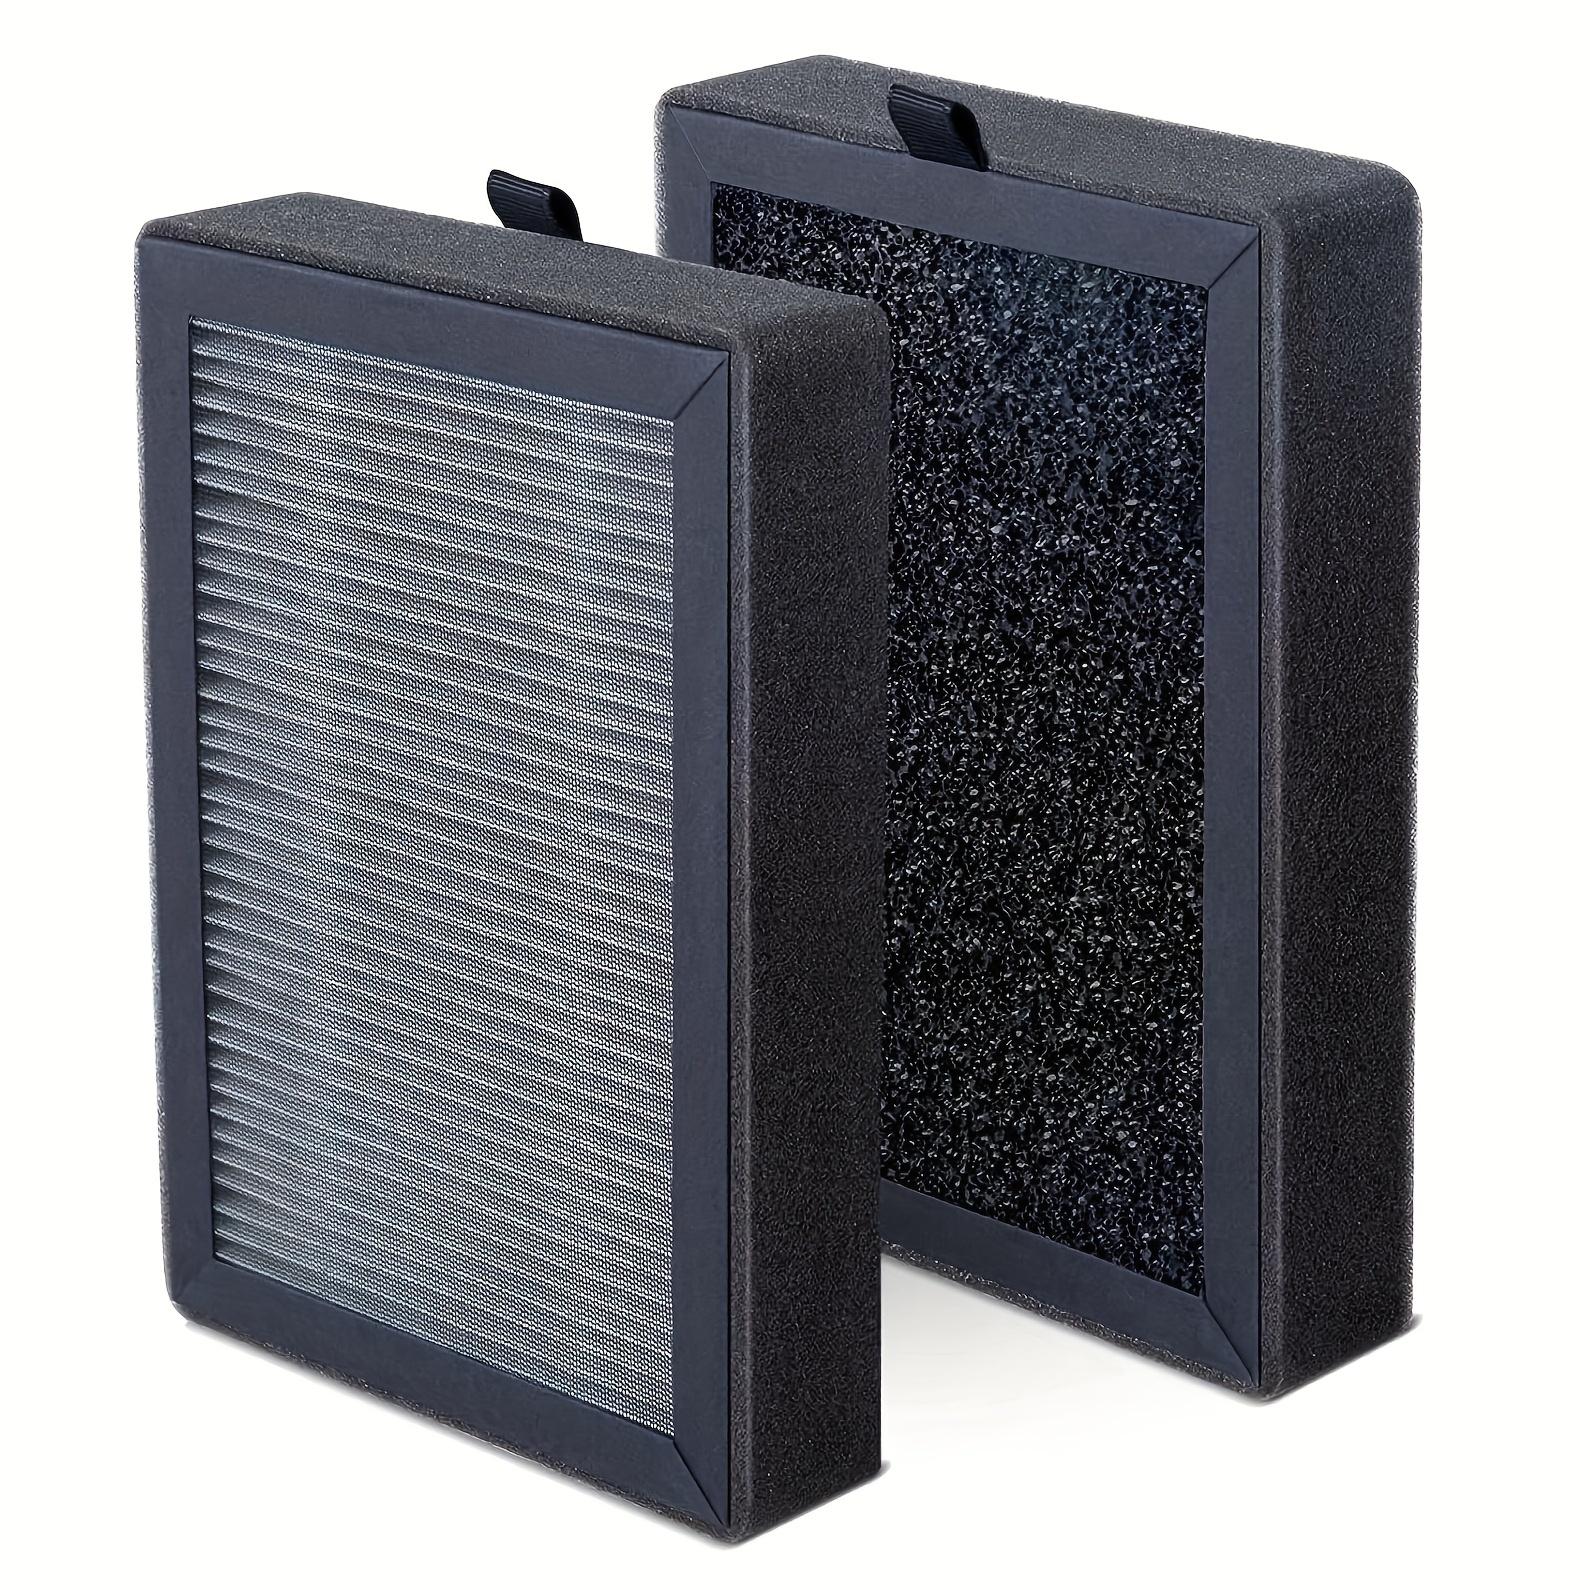 Levoit LV-H133 Tower True HEPA Replacement Filter